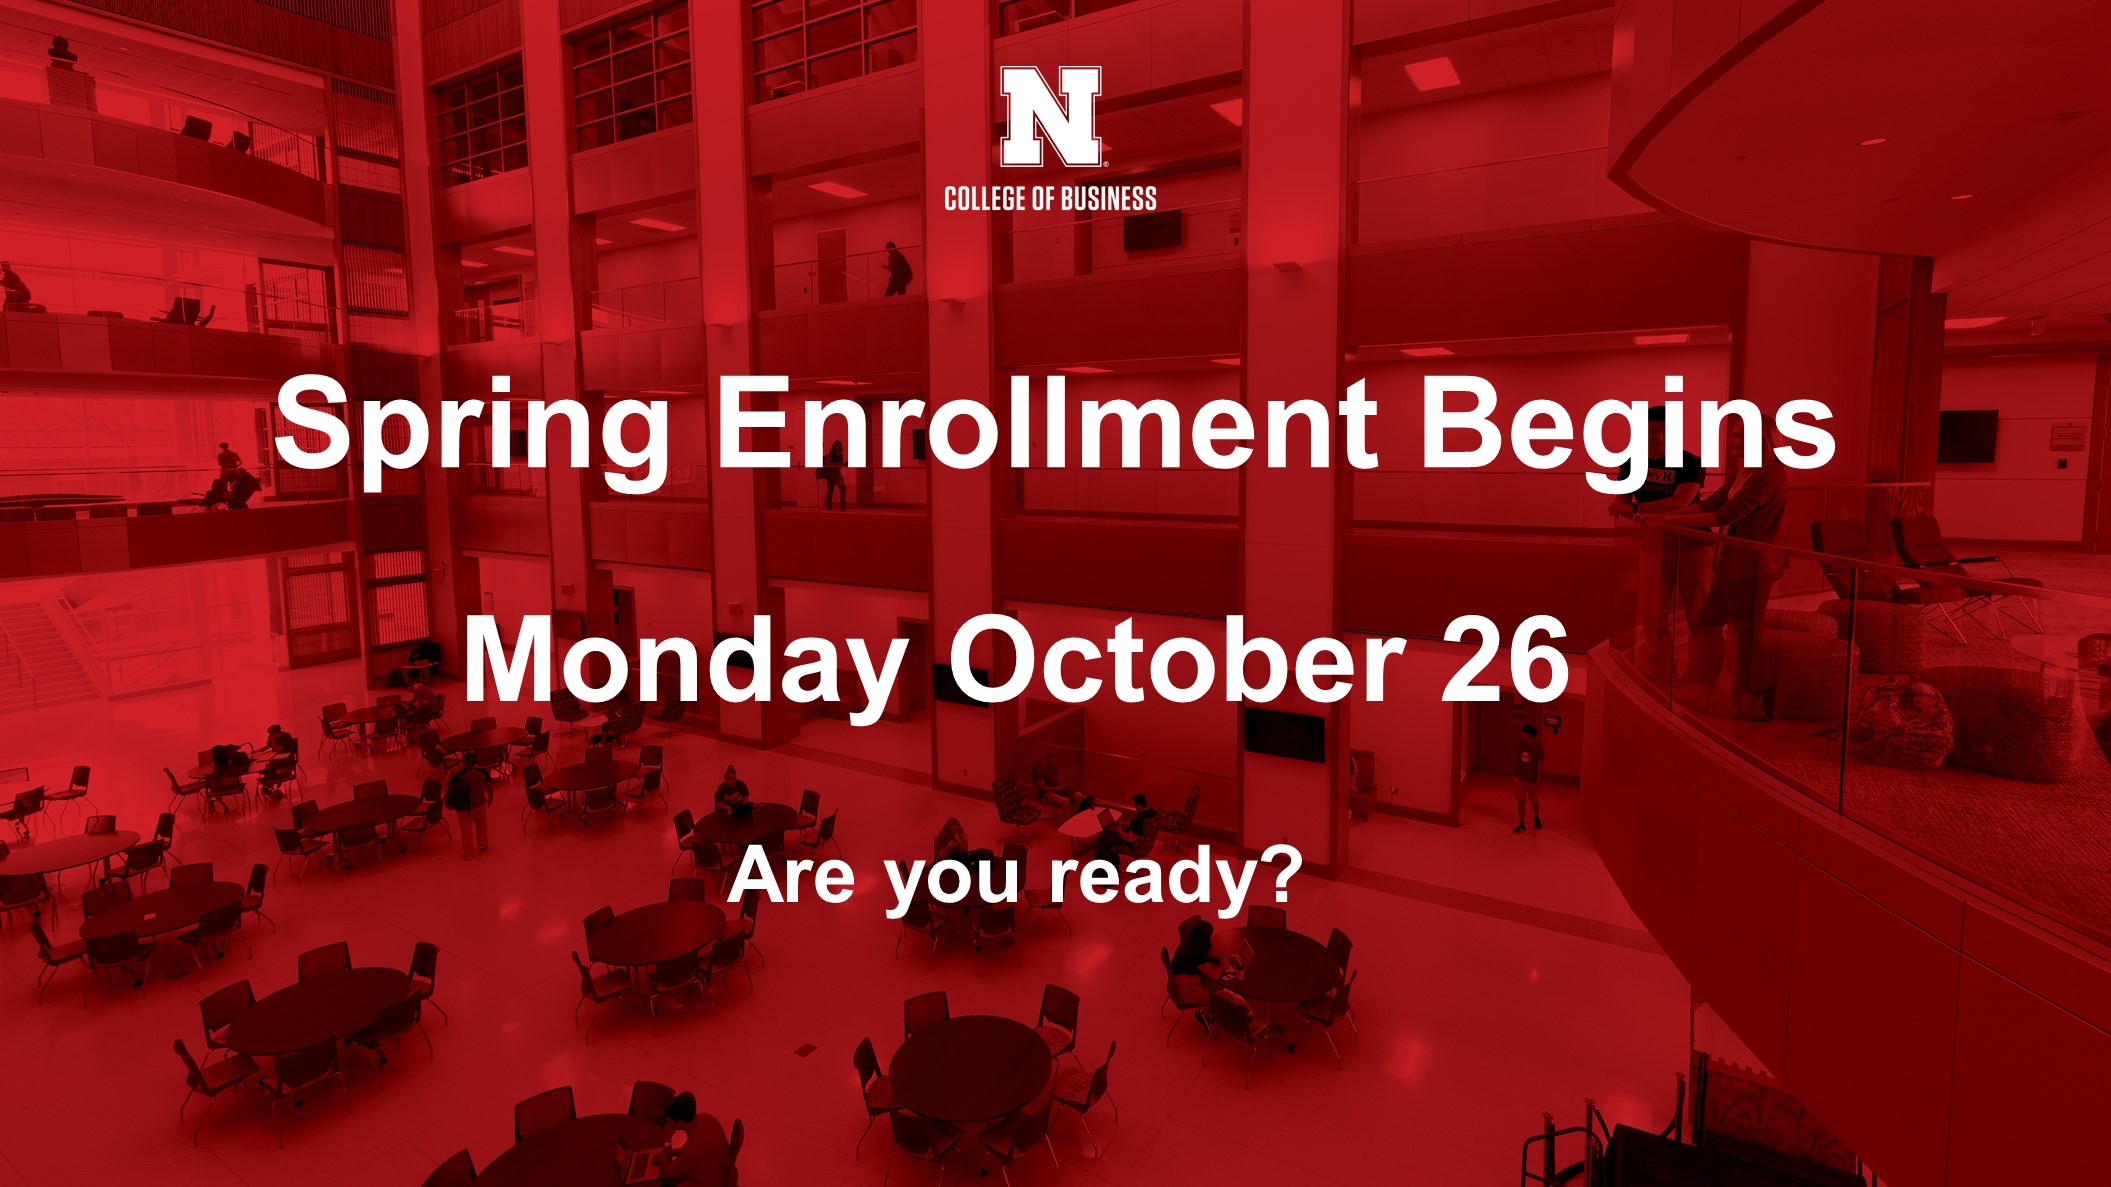 Are You Ready for Priority Registration? Announce University of